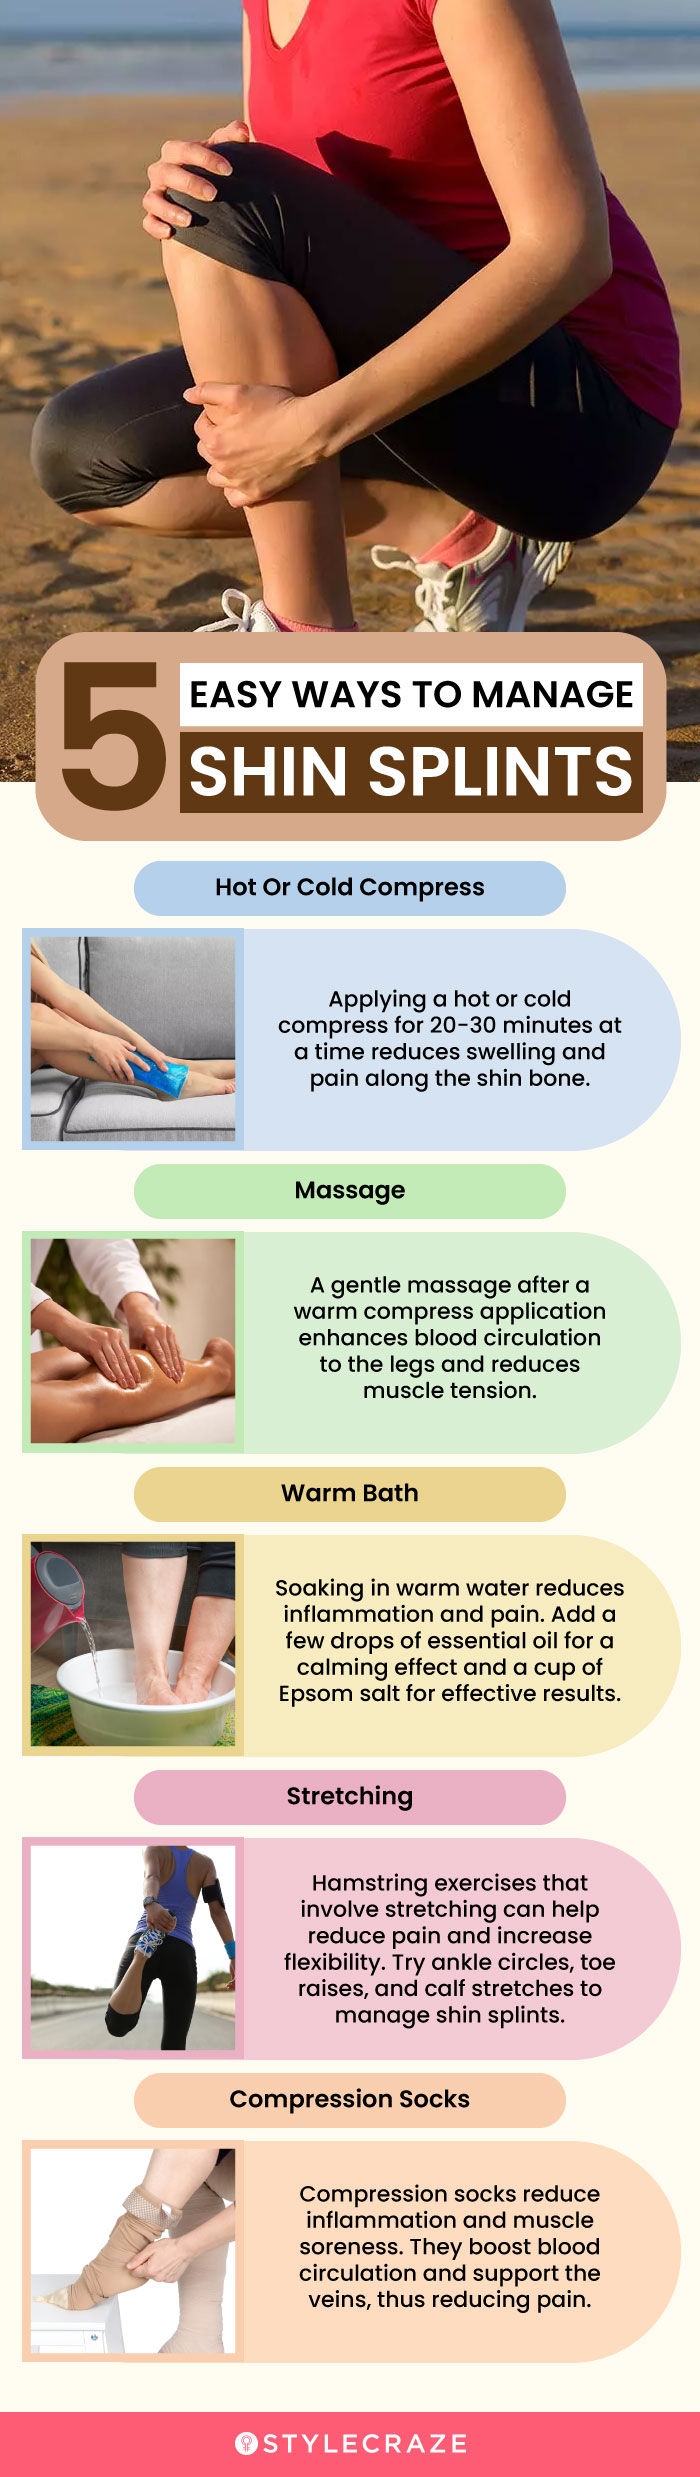 5 easy ways to manage shin splints (infographic)